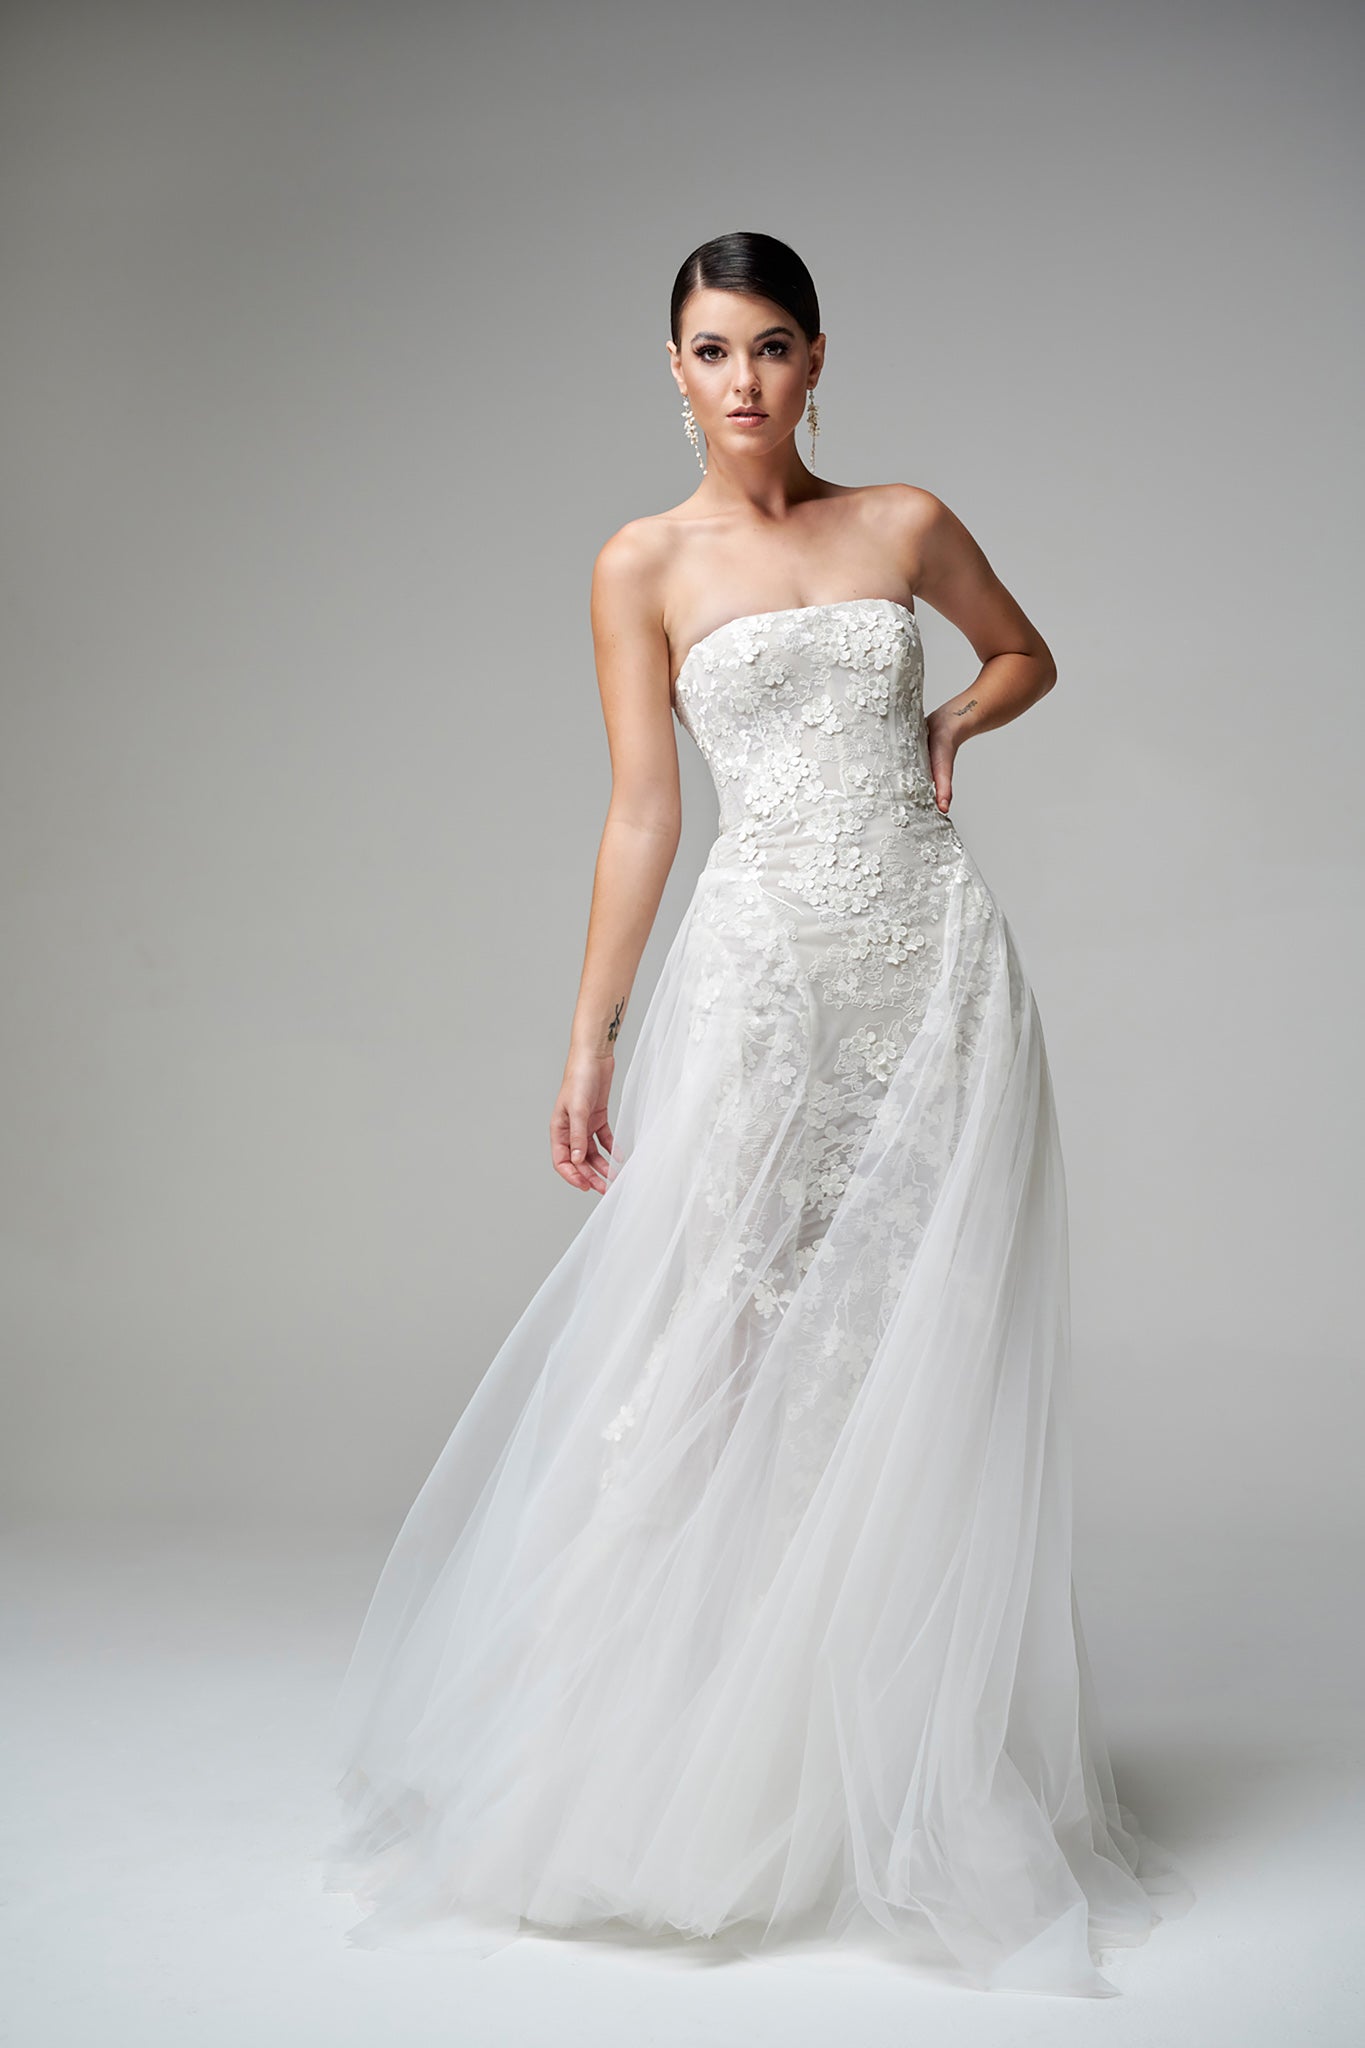 floral bridal gown with strapless neckline